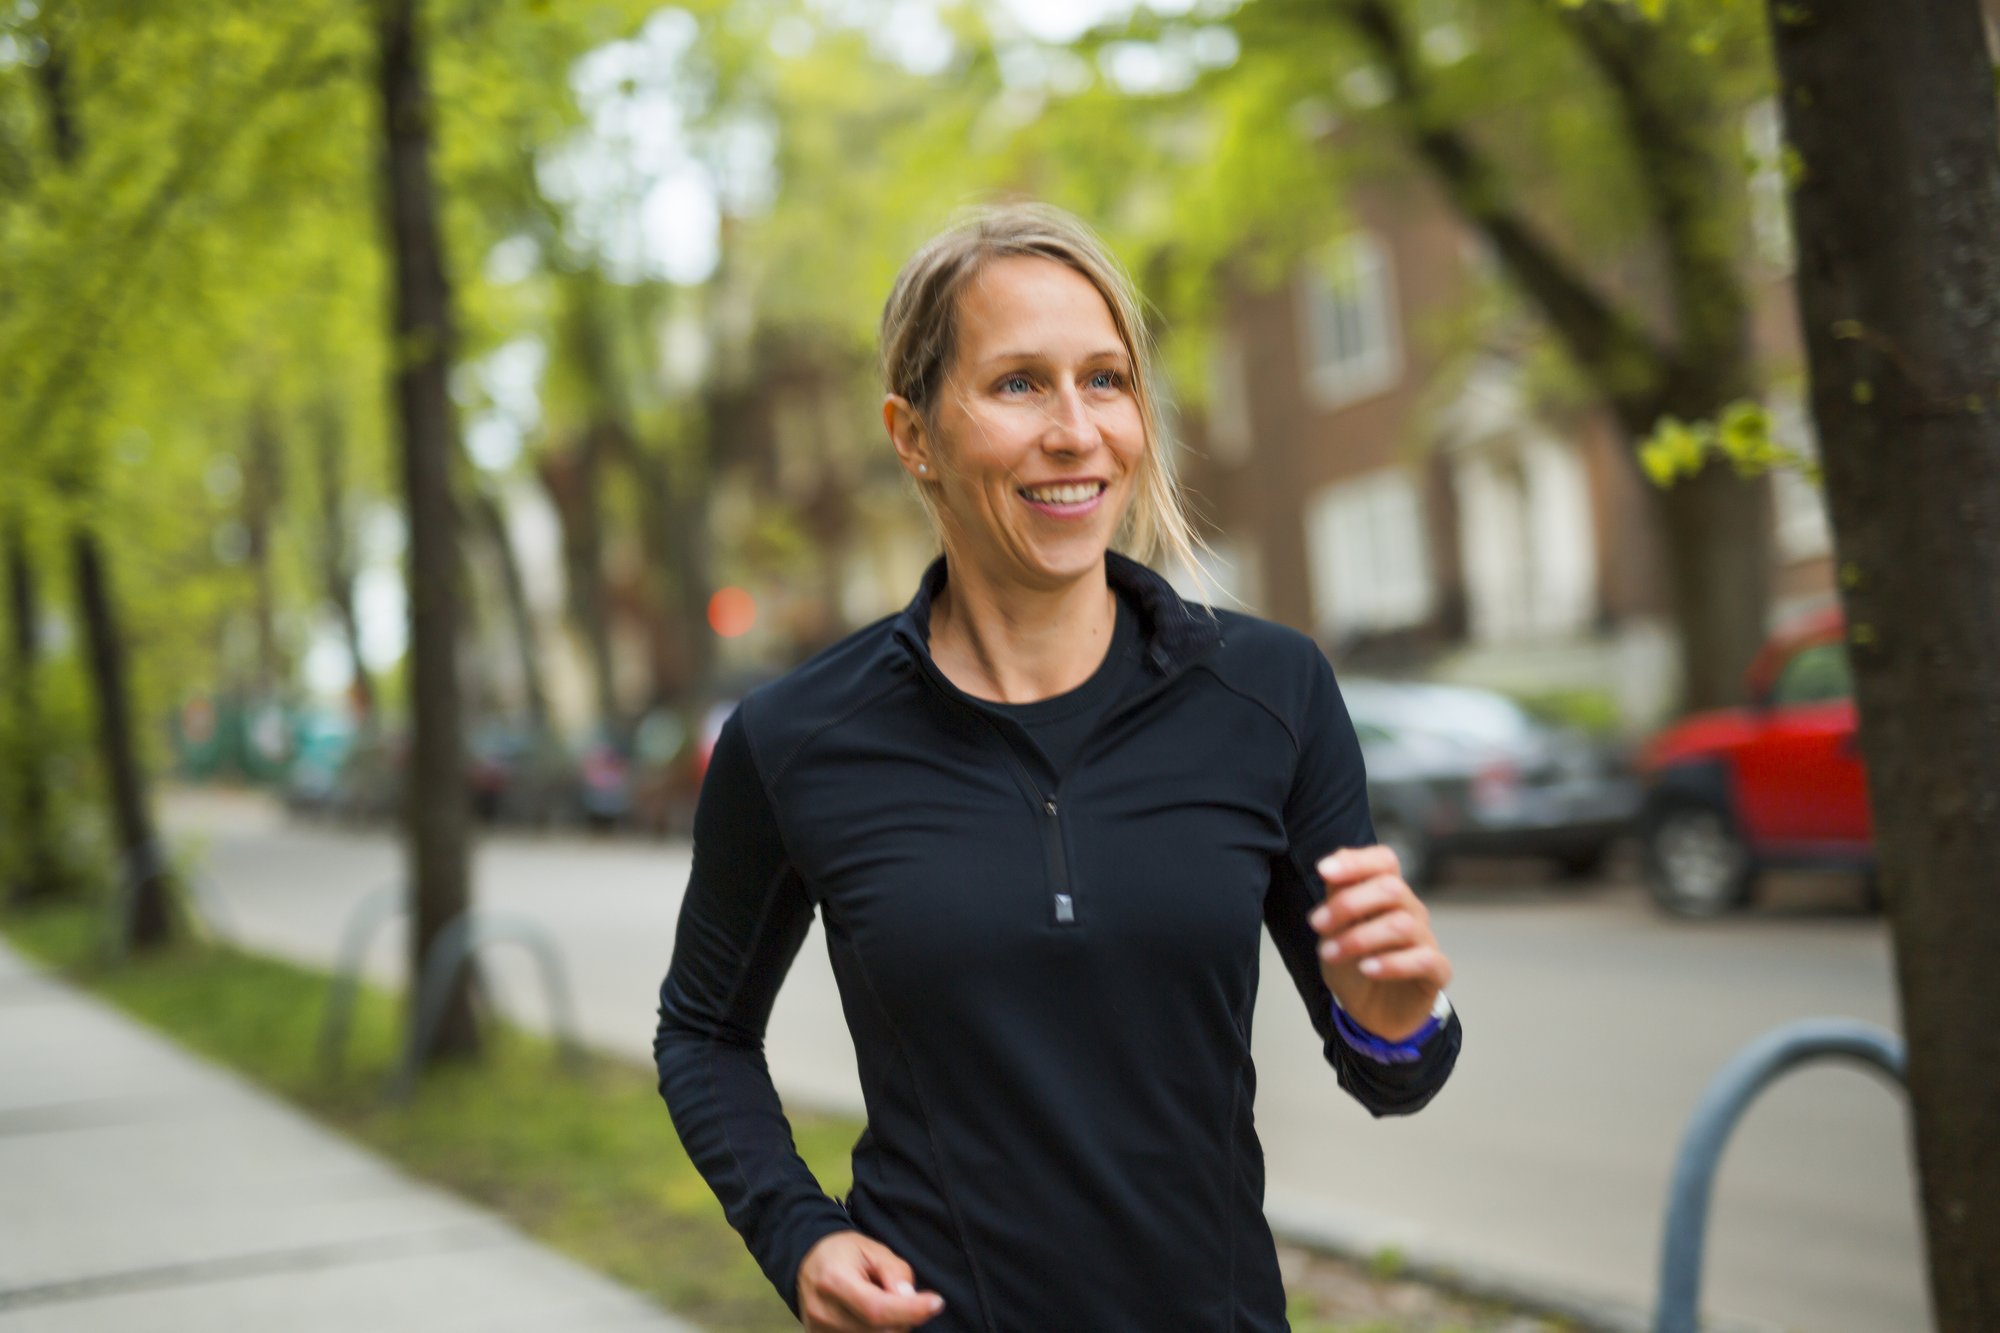 How to Start Running After 40: Overcoming Challenges and Finding Success